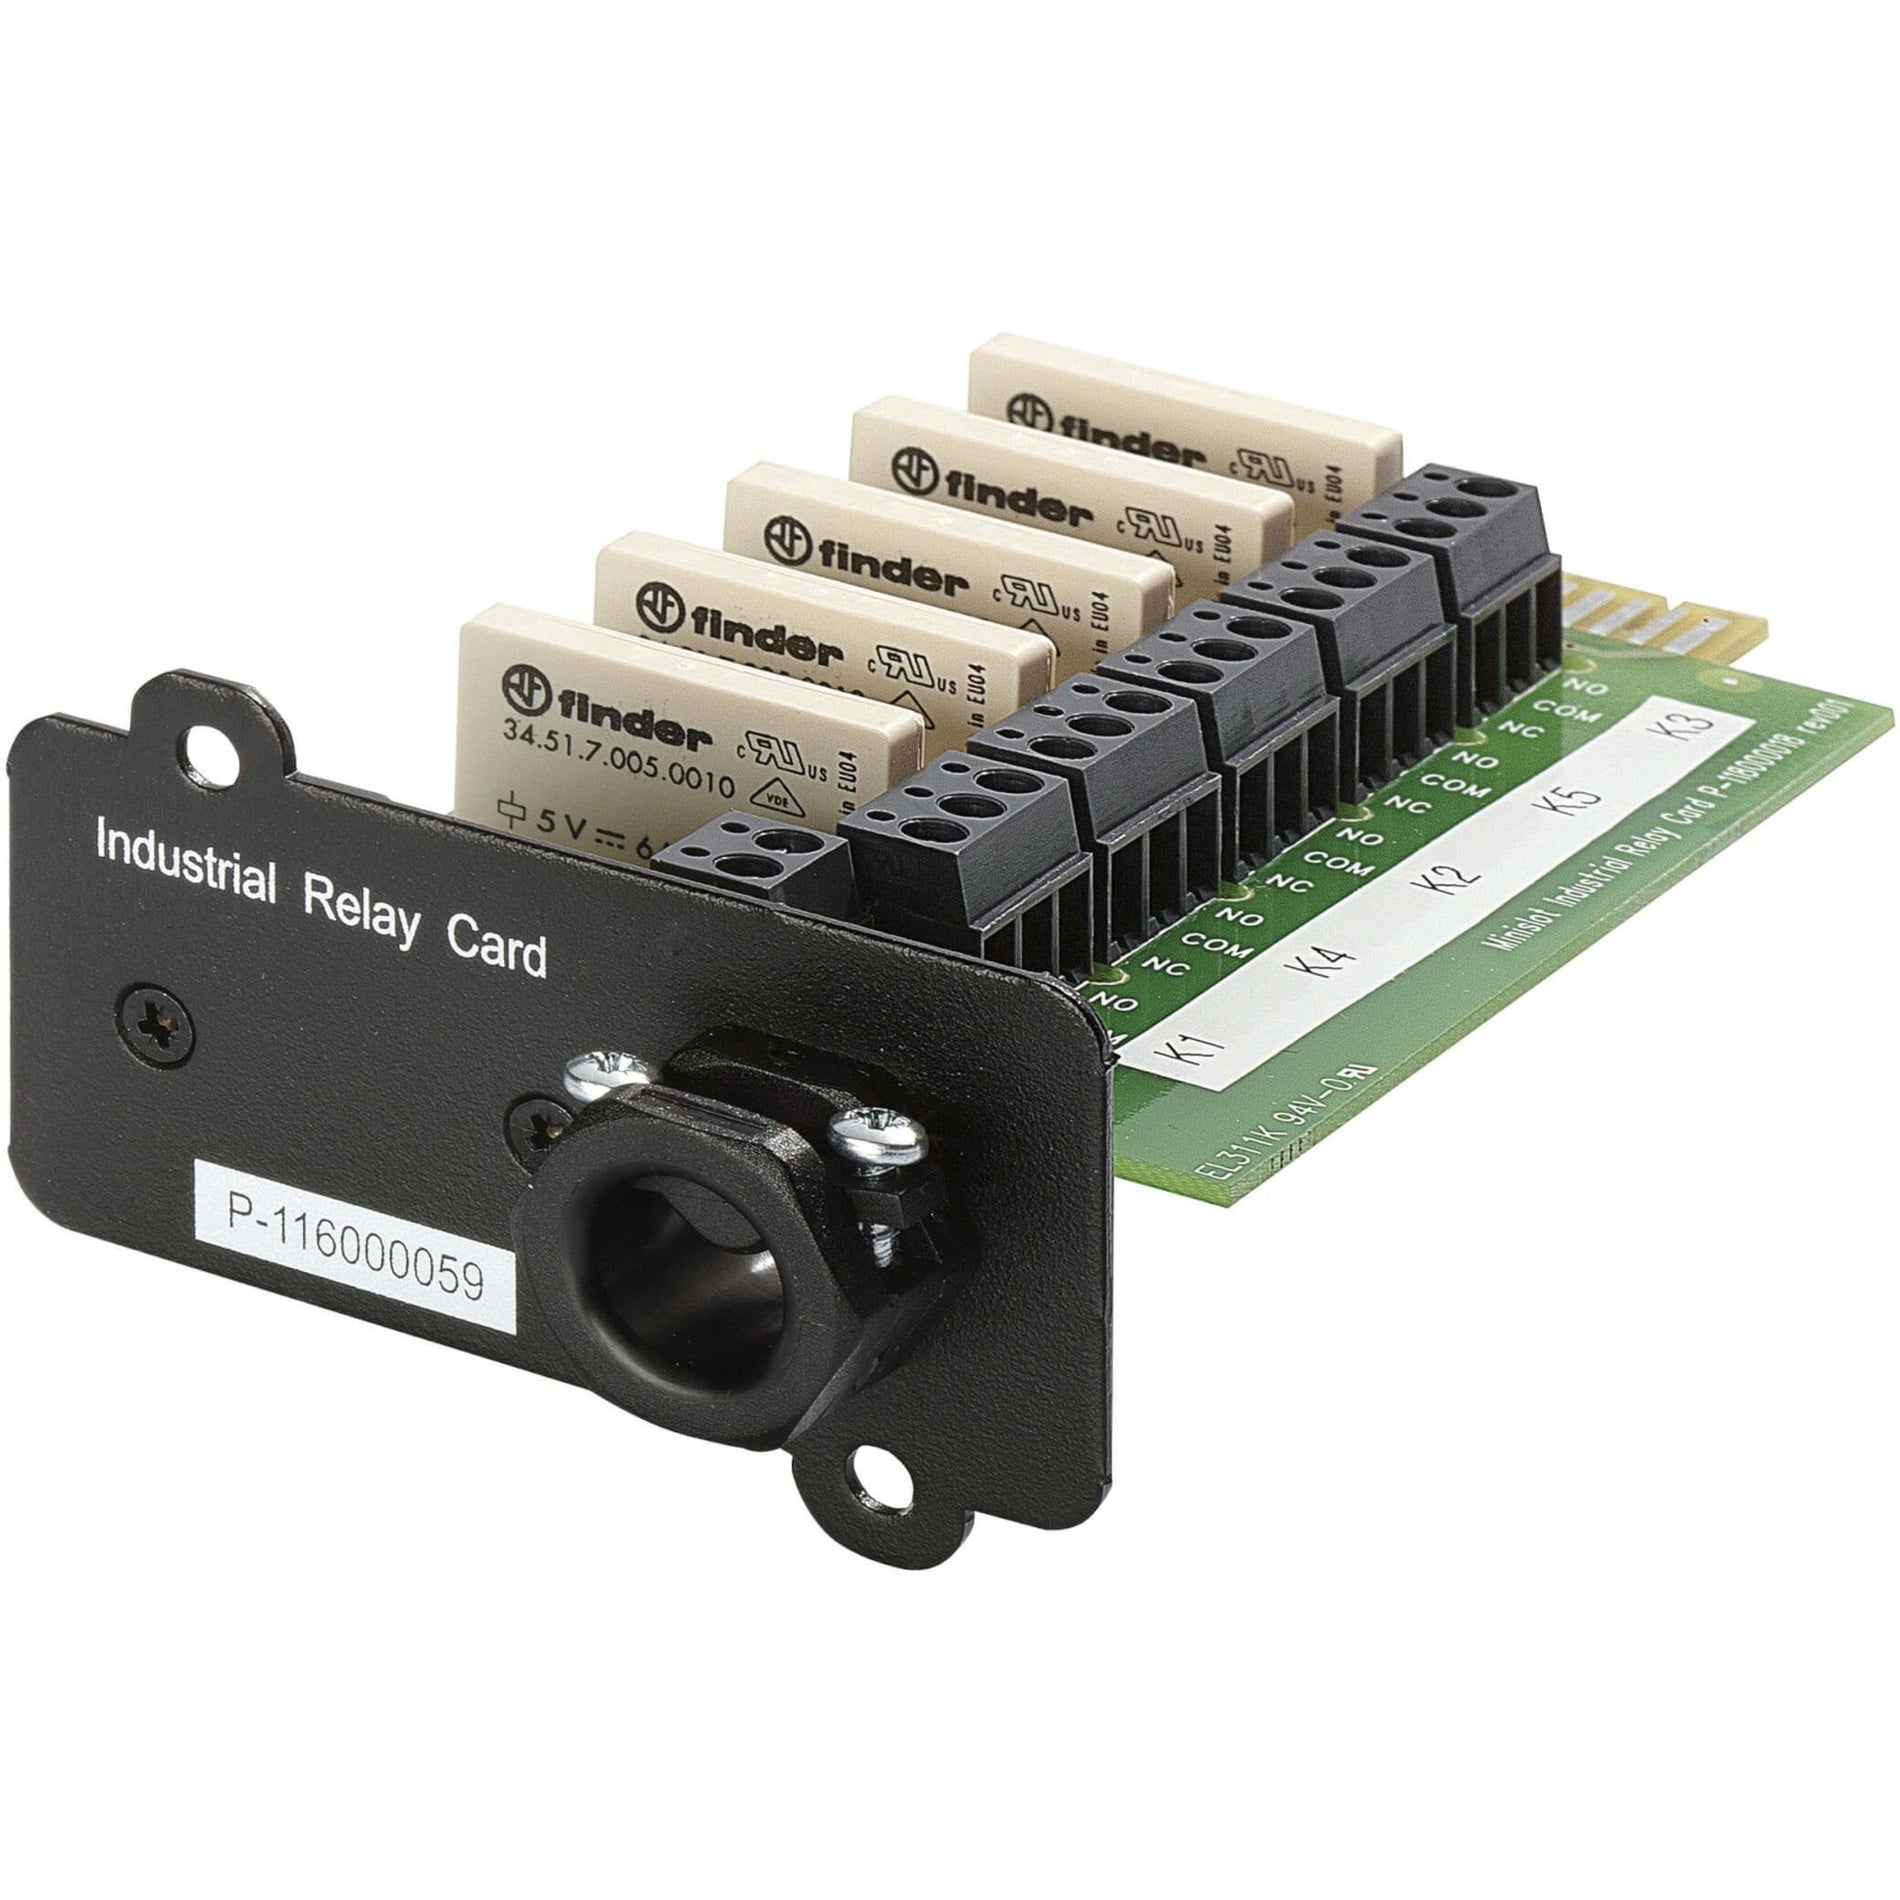 Eaton INDRELAY-MS Industrial Relay Card for Eaton UPS Systems